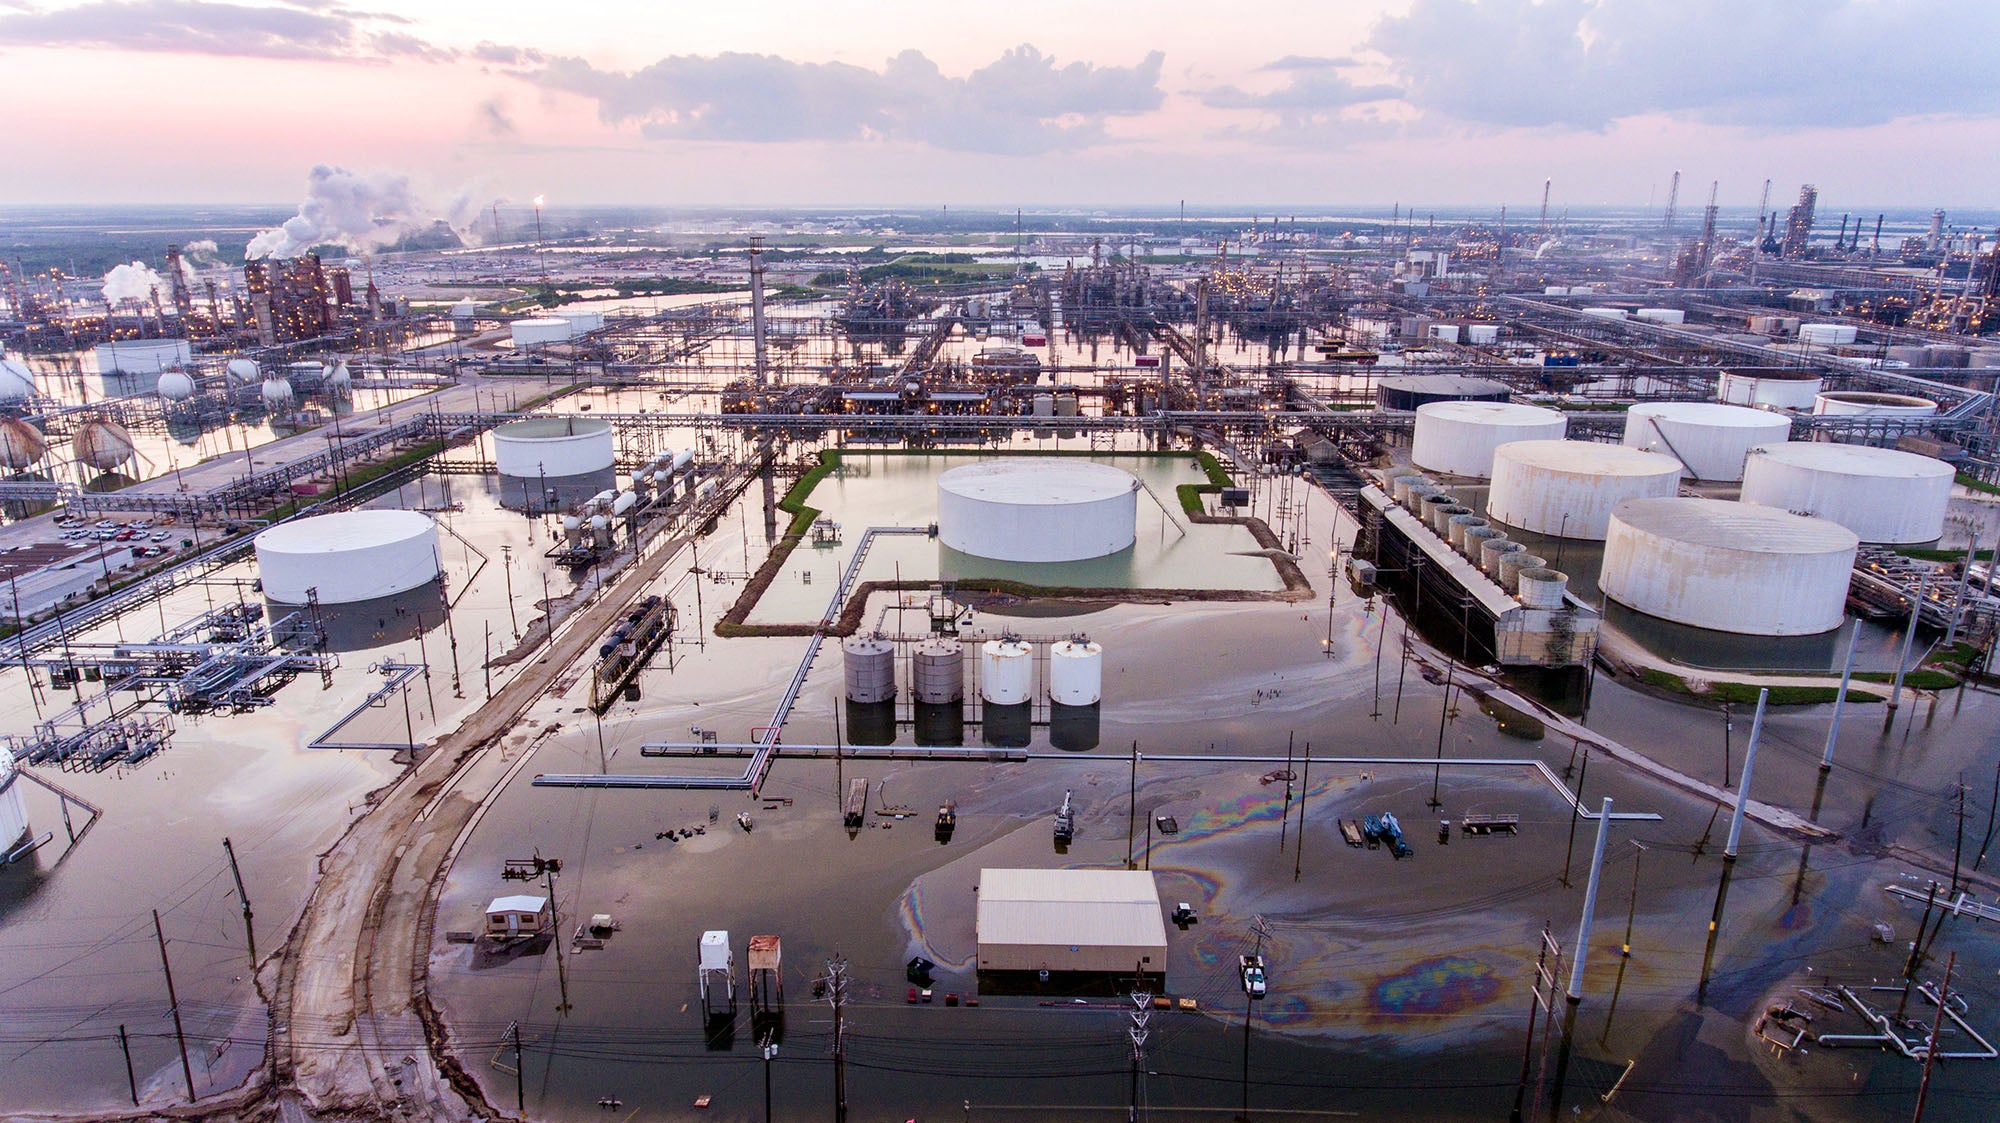 Aerial photo of the nation's largest oil refinery, owned by Motiva and located in Port Arthur, Texas, submerged in floodwaters in 2017 due to Hurricane Harvey.